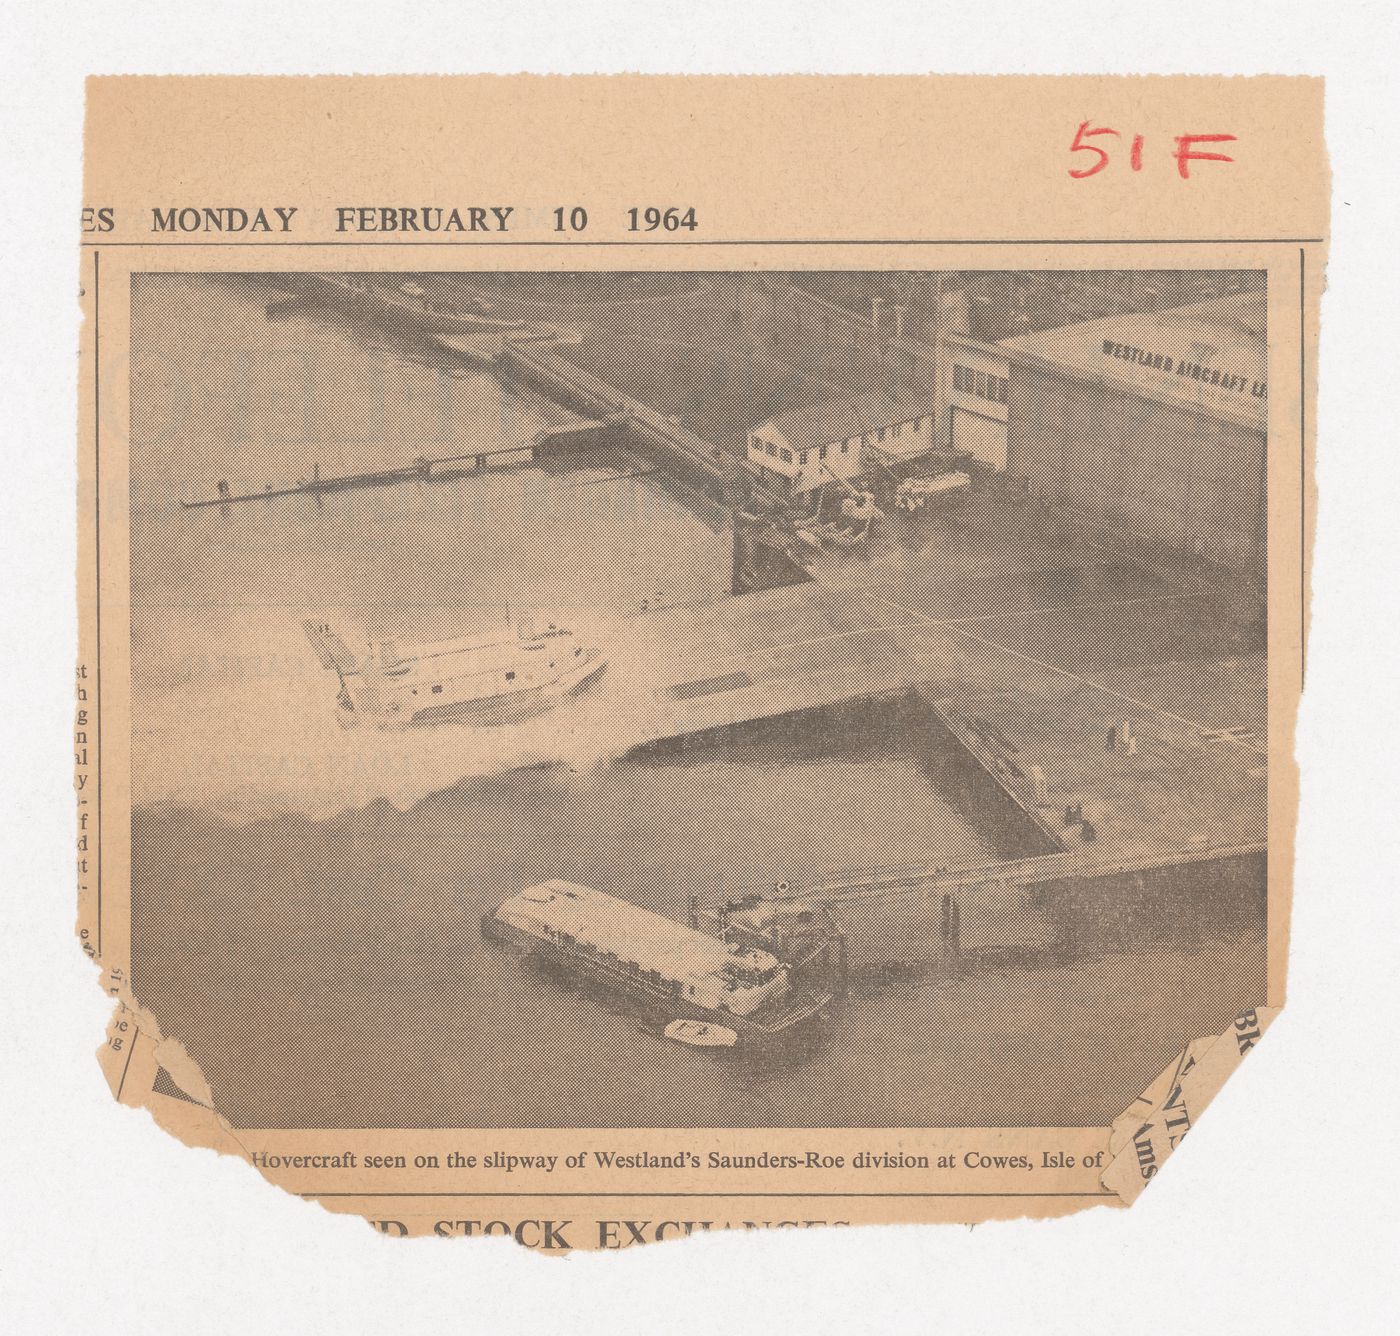 Newspaper clipping from The Times showing a photo of a hovercraft on the slipway of Westland's Saunders-Roe division